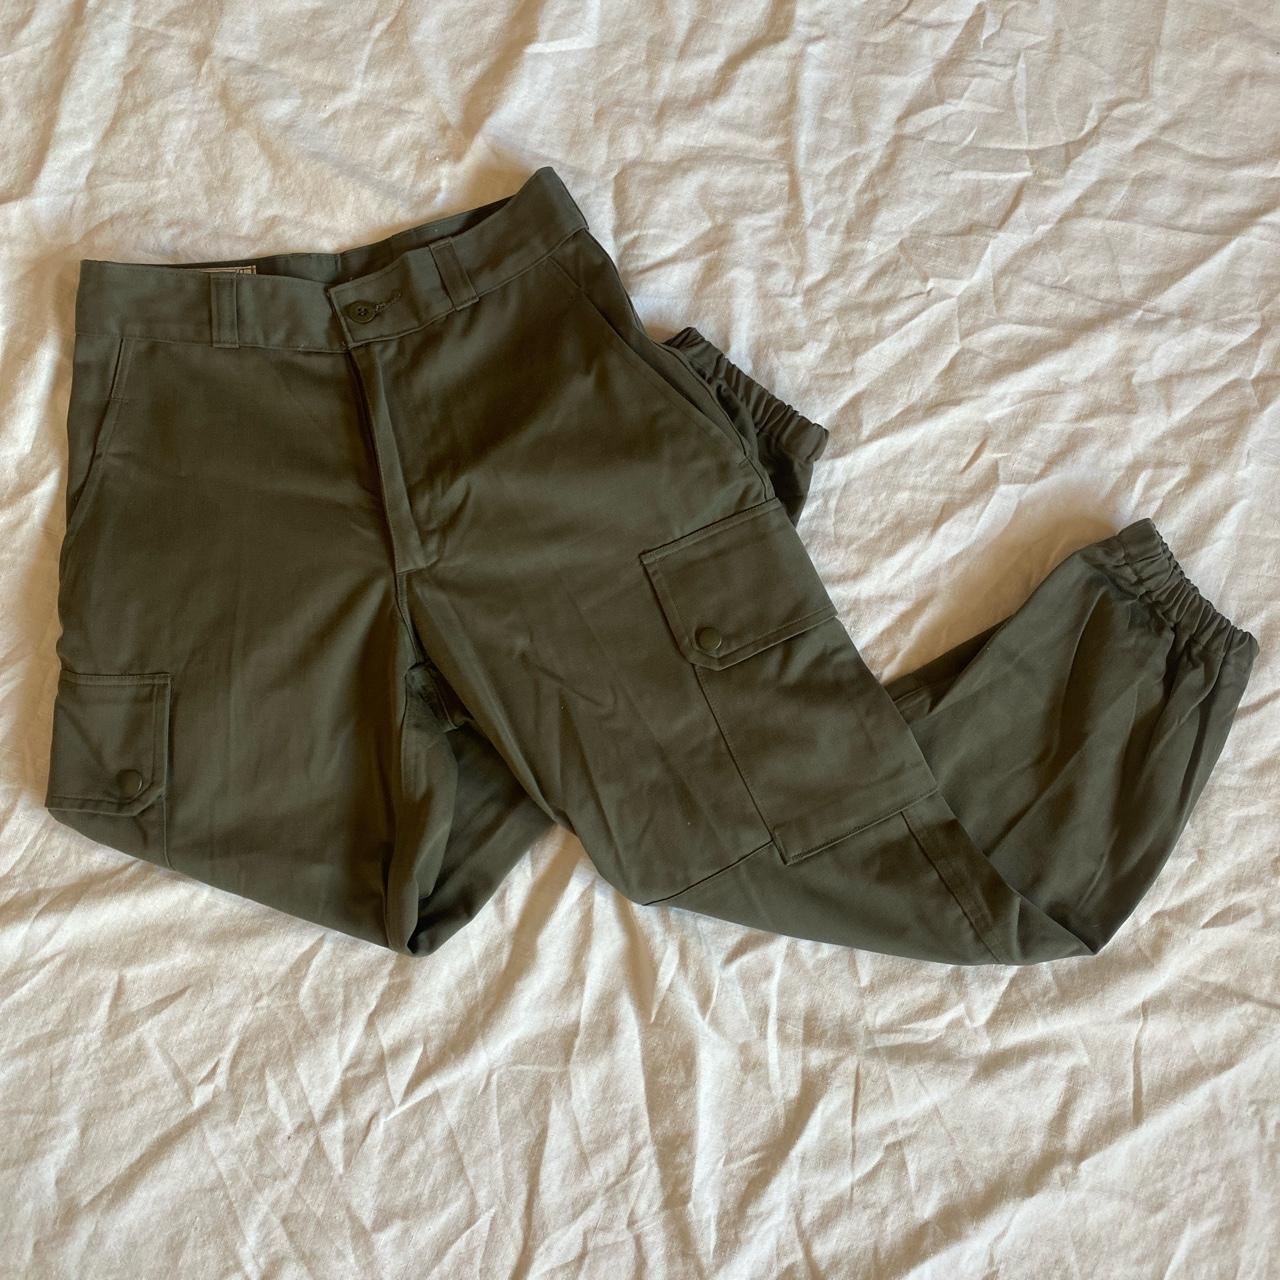 Vintage cargo army pants. Size 25/25. Perfect condition - Depop